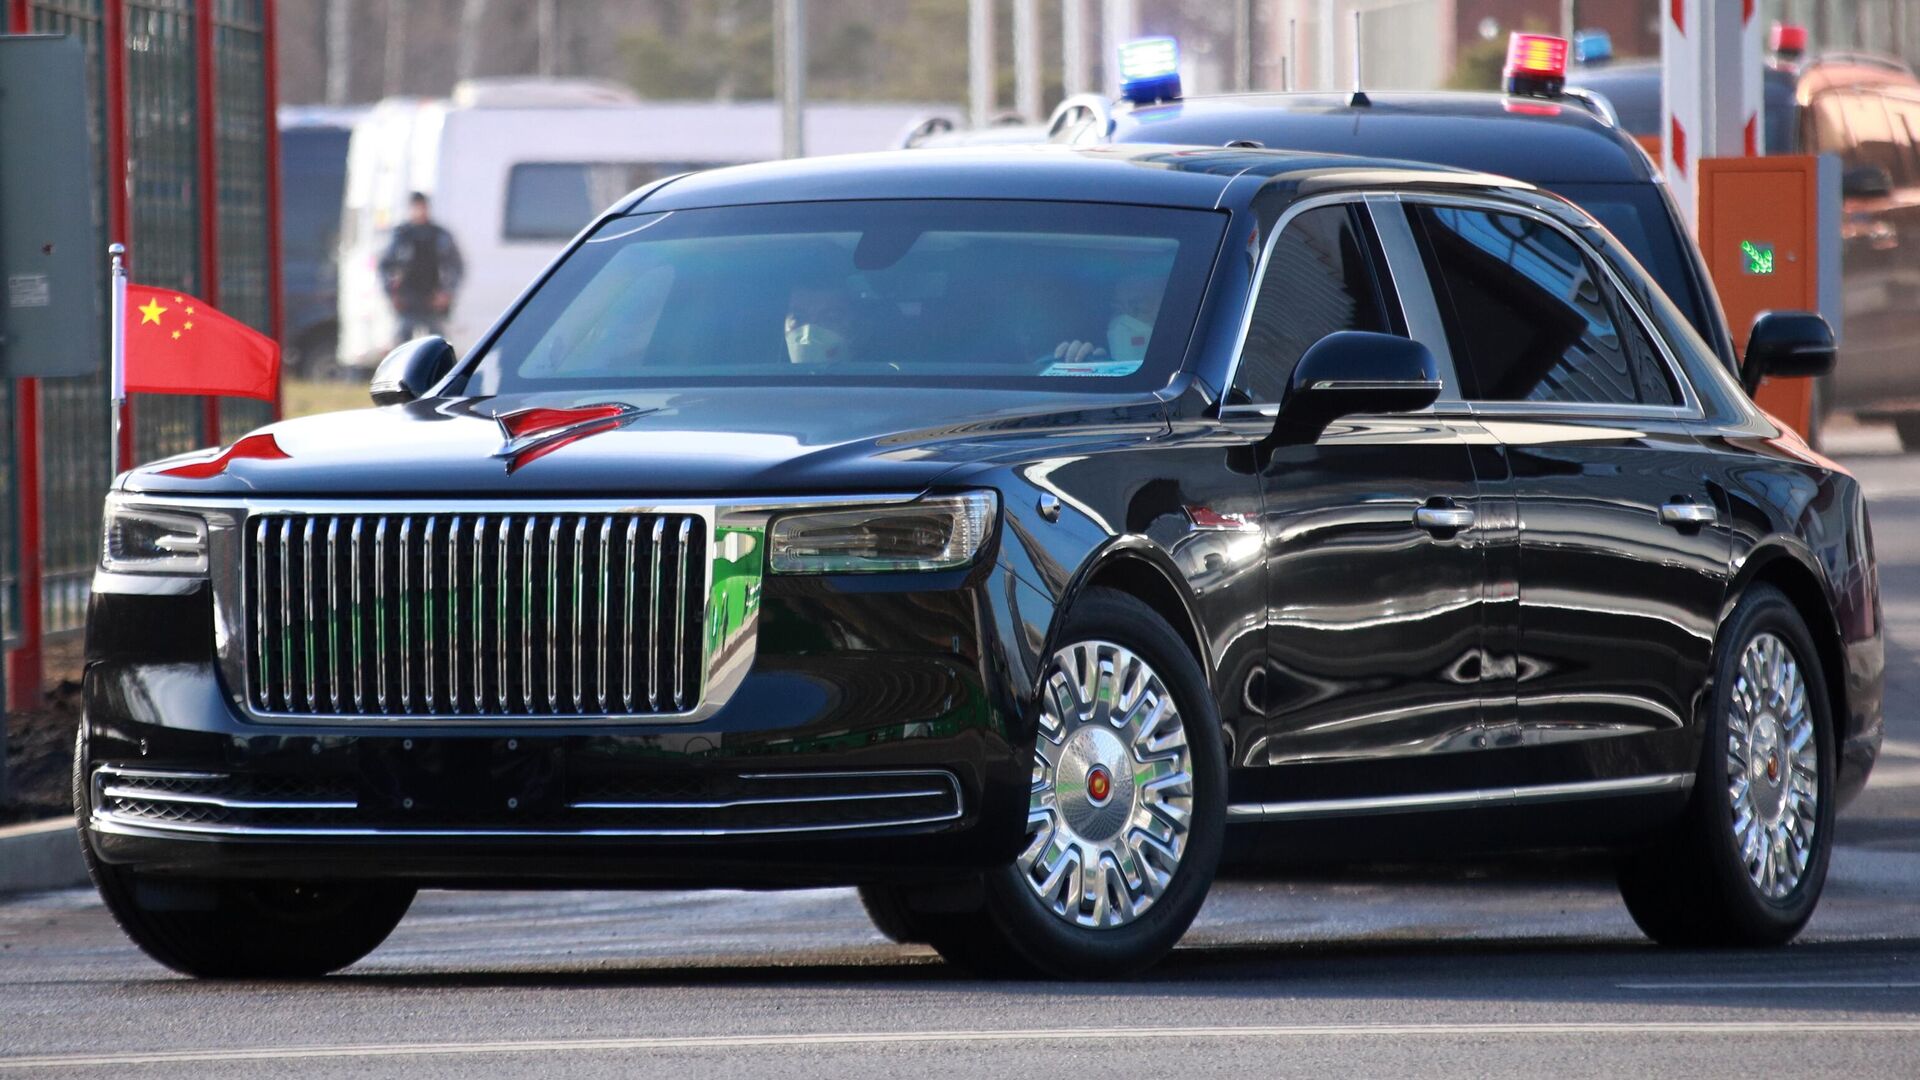 Ultra-rare Hongqi N701 limousine spotted in Russia being used by President Xi Jinping during his official state visit. Monday, March 20, 2023. - Sputnik International, 1920, 20.03.2023